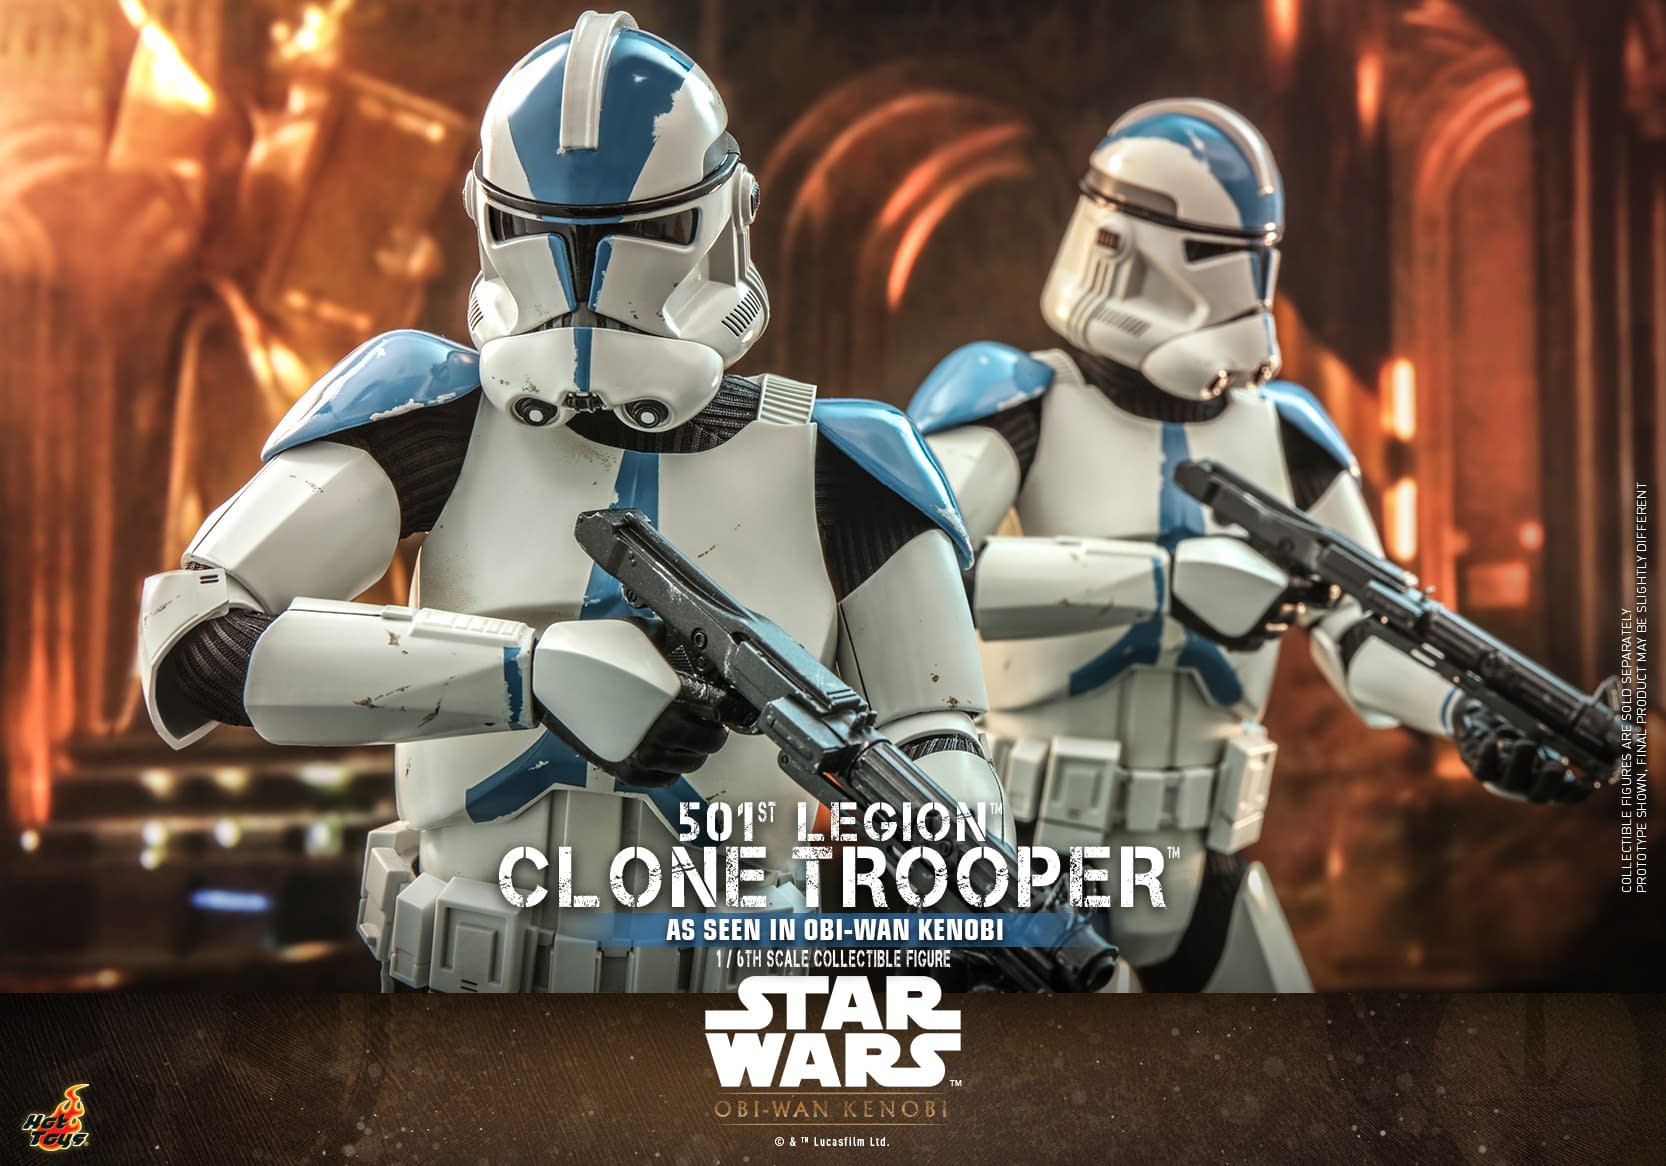 Star Wars 501st Clone Troopers Deploy Once Again with Hot Toys 